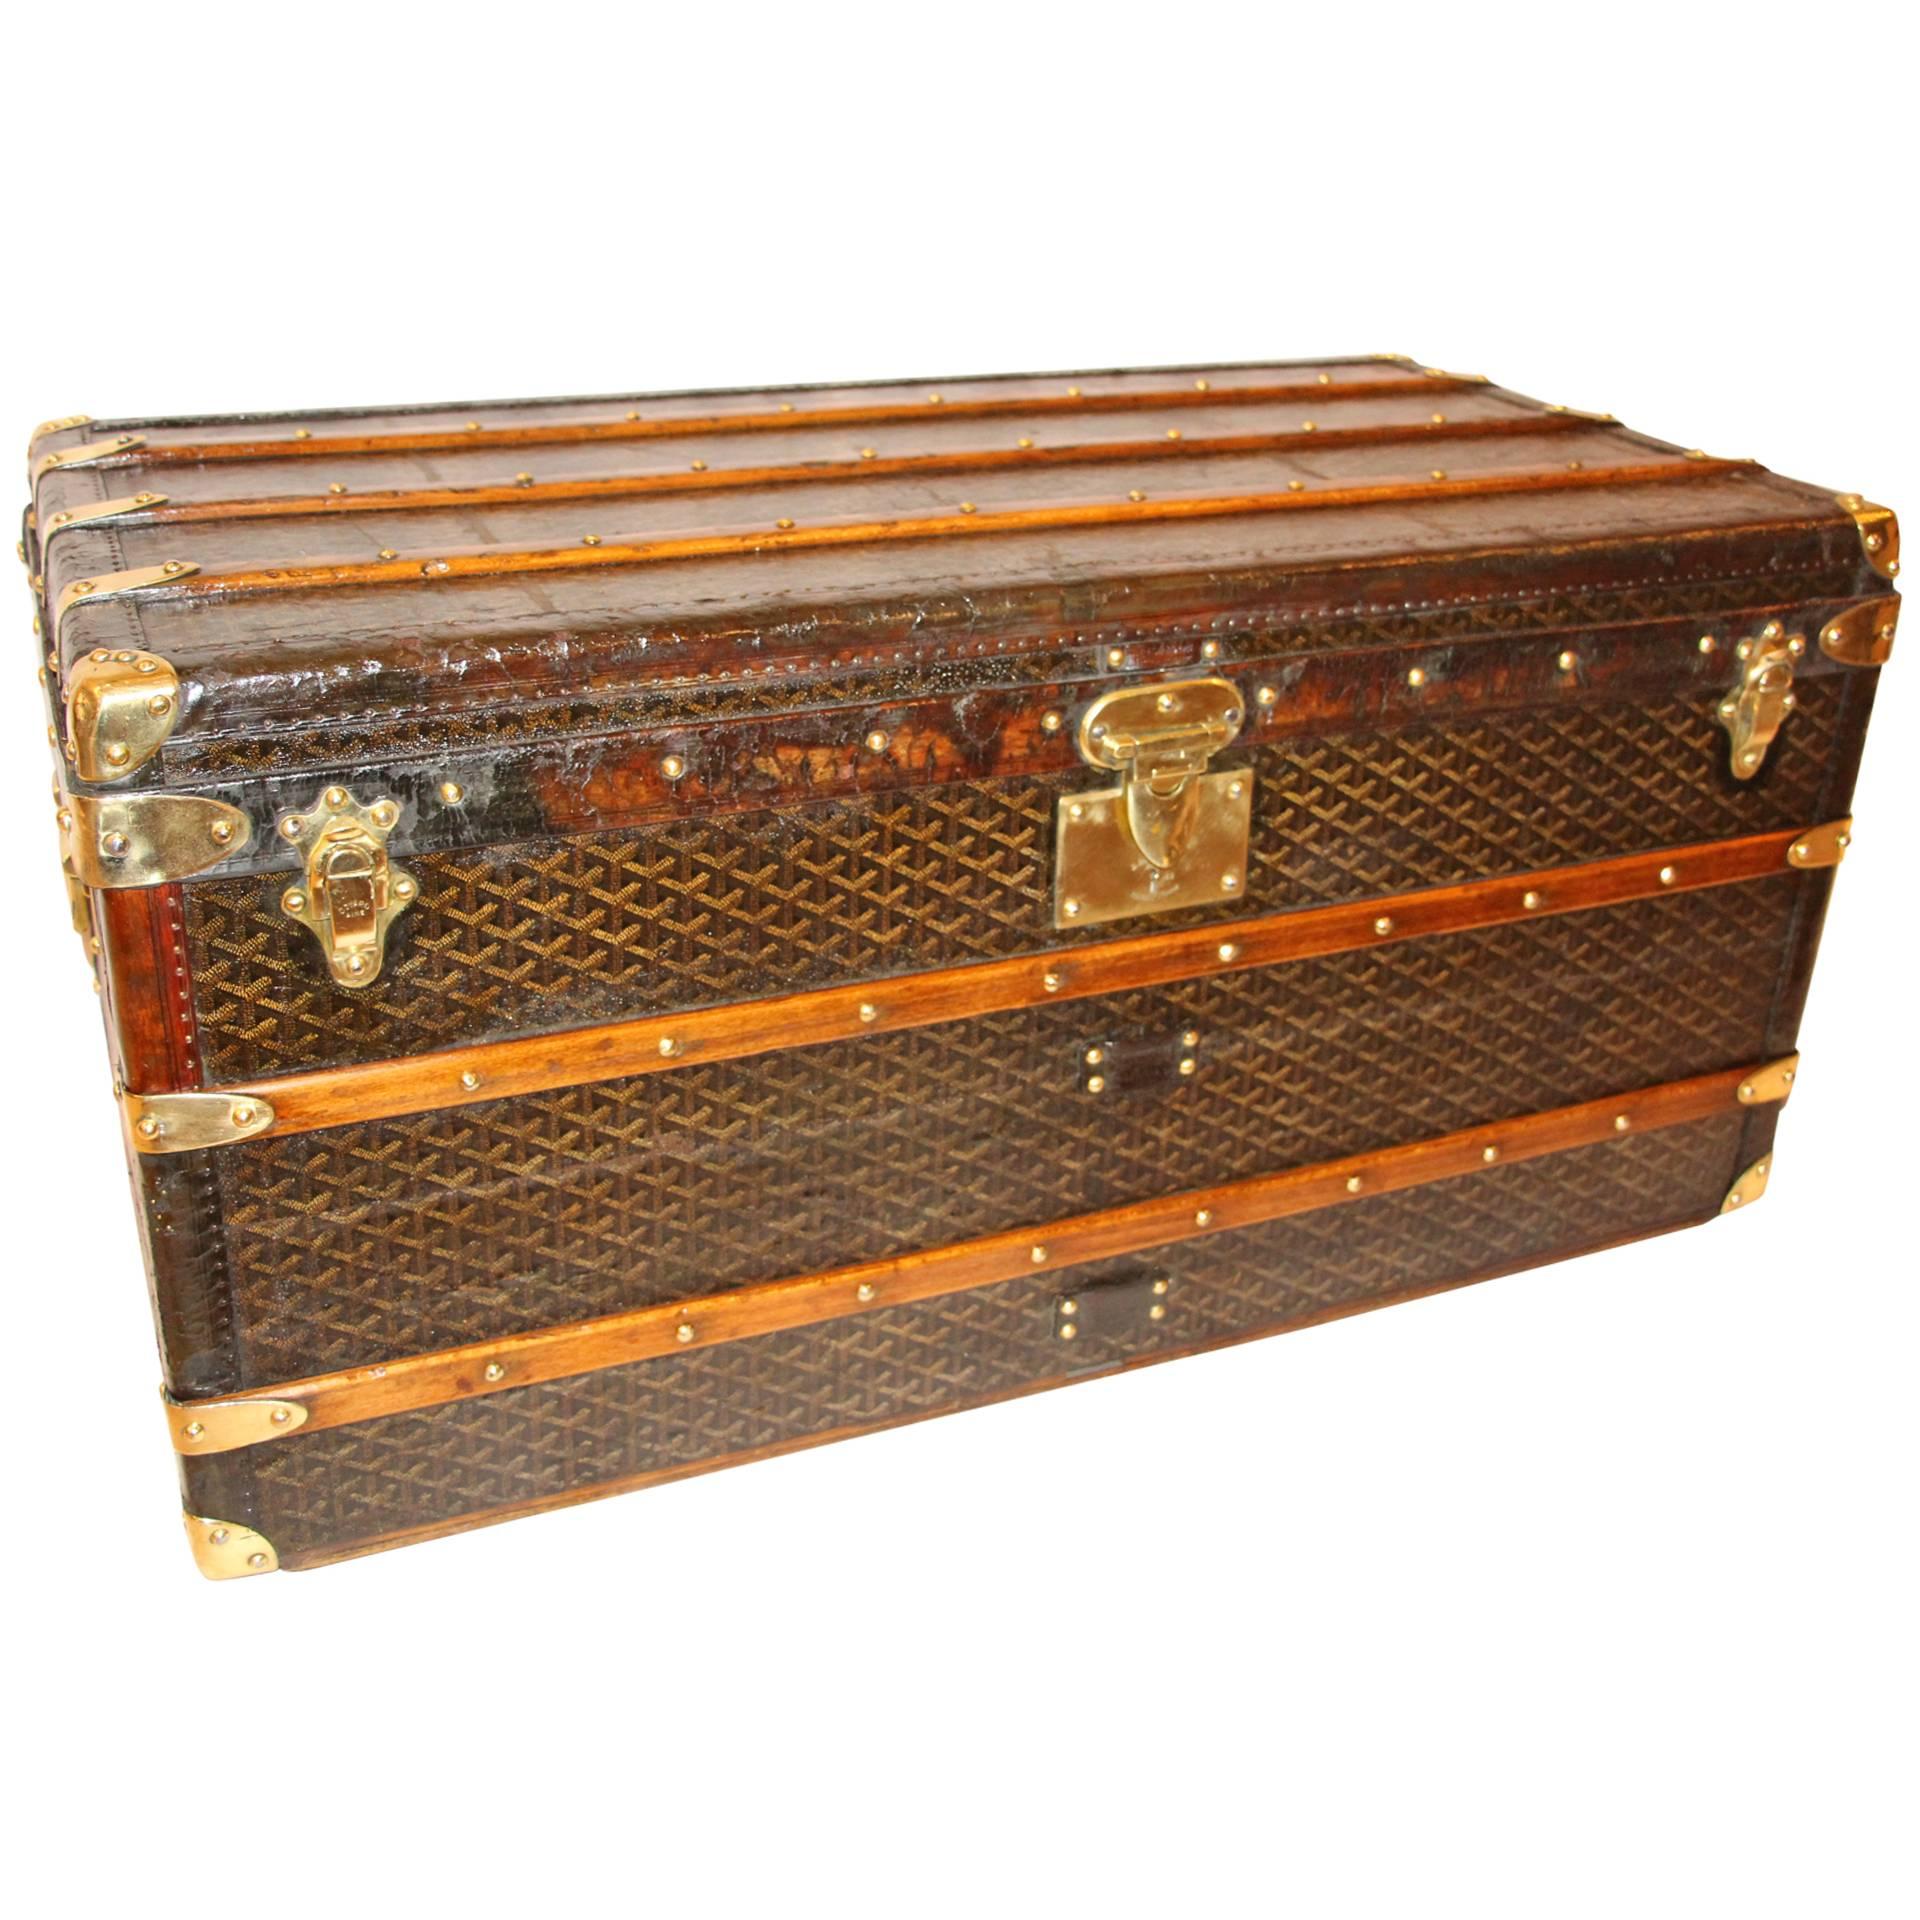 1920s Goyard Courrier Steamer Trunk, All Brass Fittings And Leather Trim